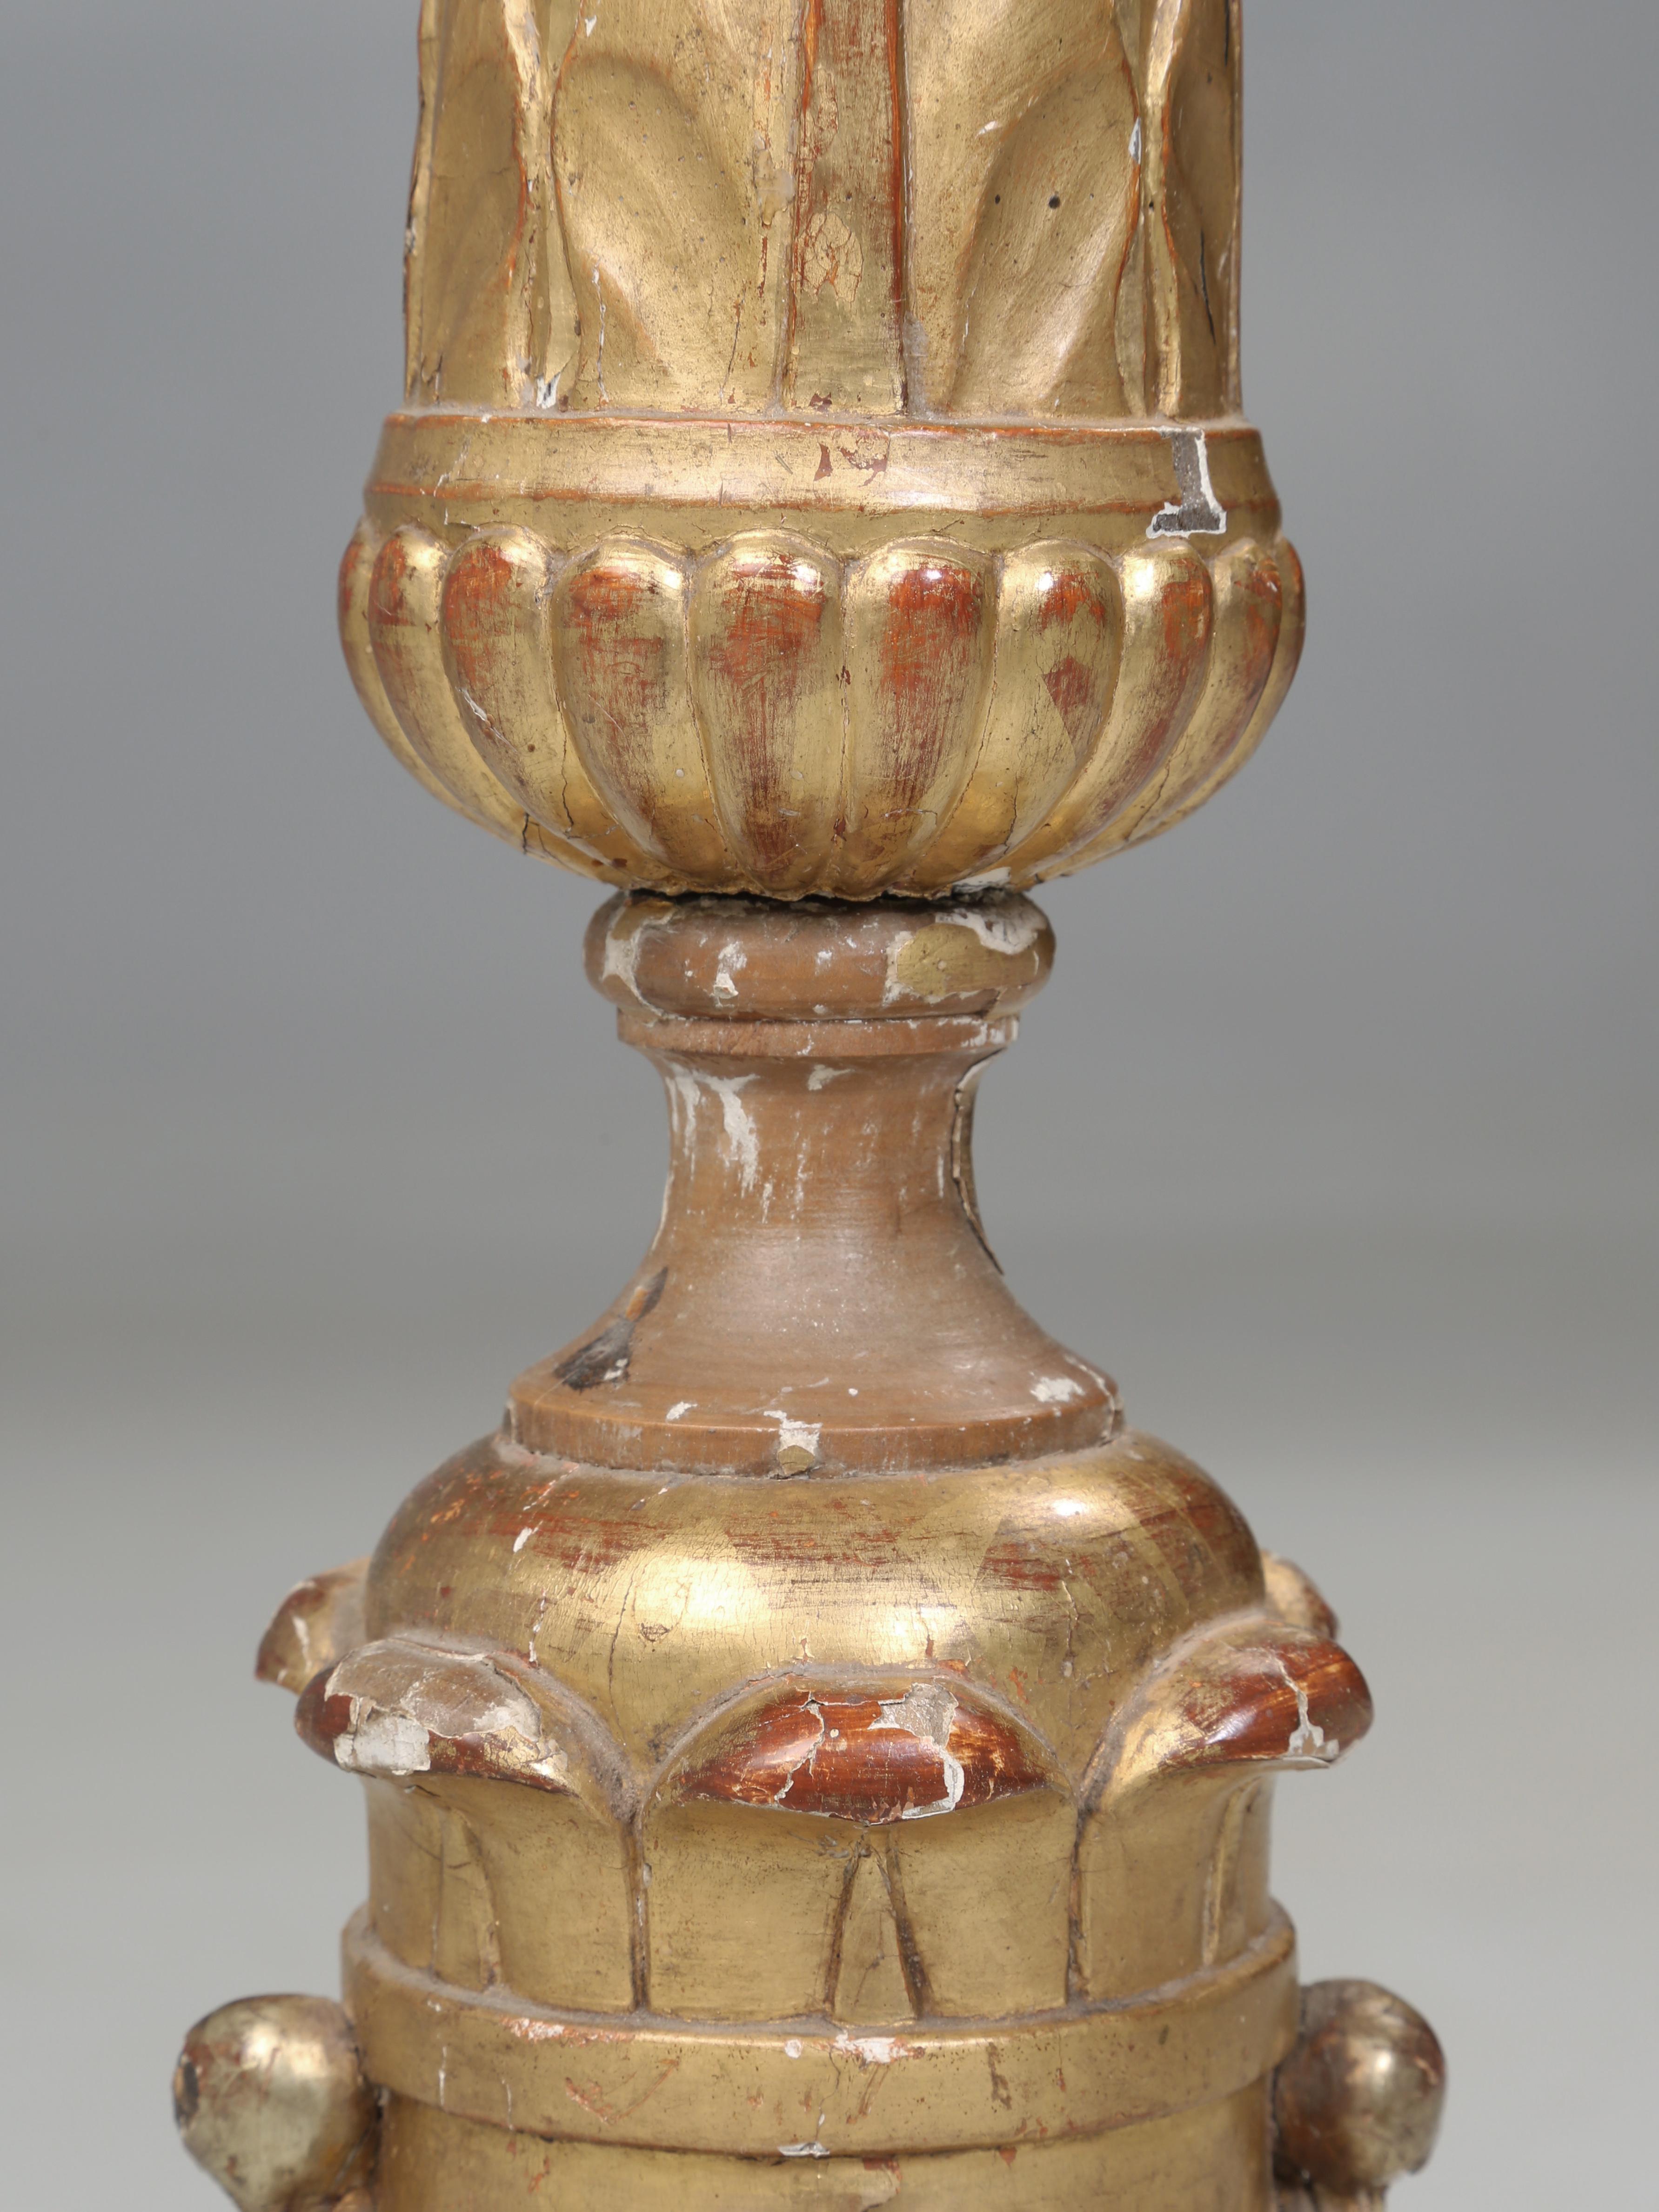 Gesso Italian Gilded Altar Candlestick Completely Original and Unrestored c1780-1820 For Sale